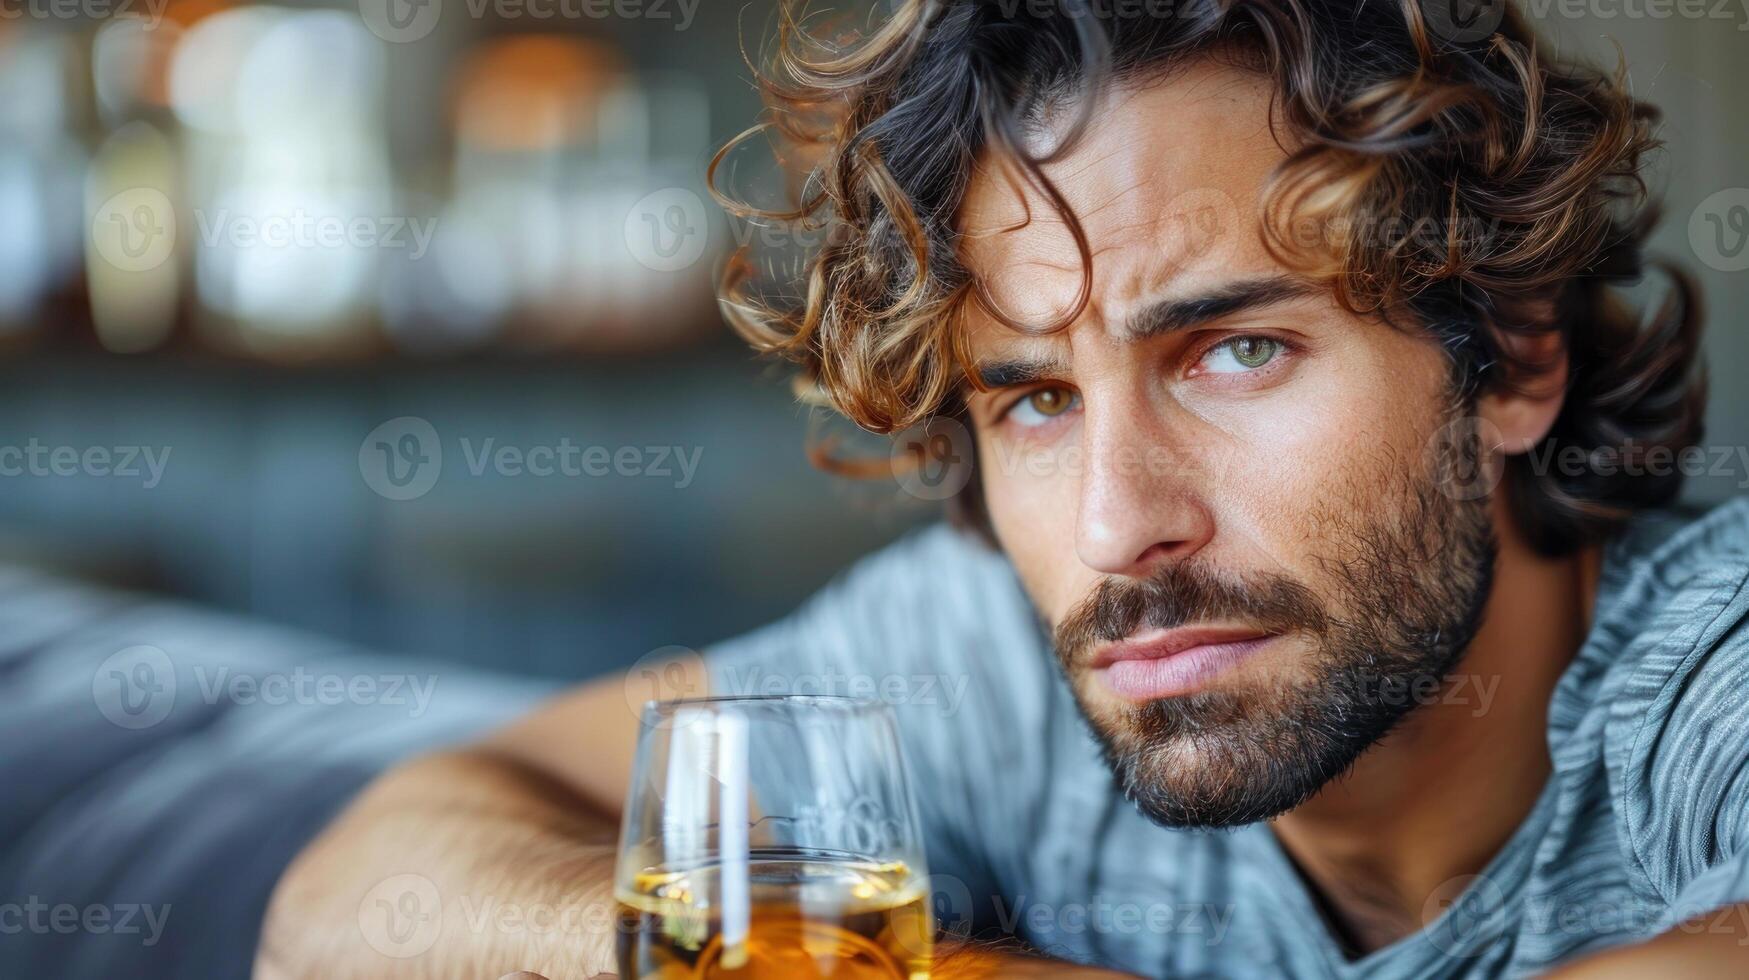 A man holds a glass of wine while making eye contact with the camera photo